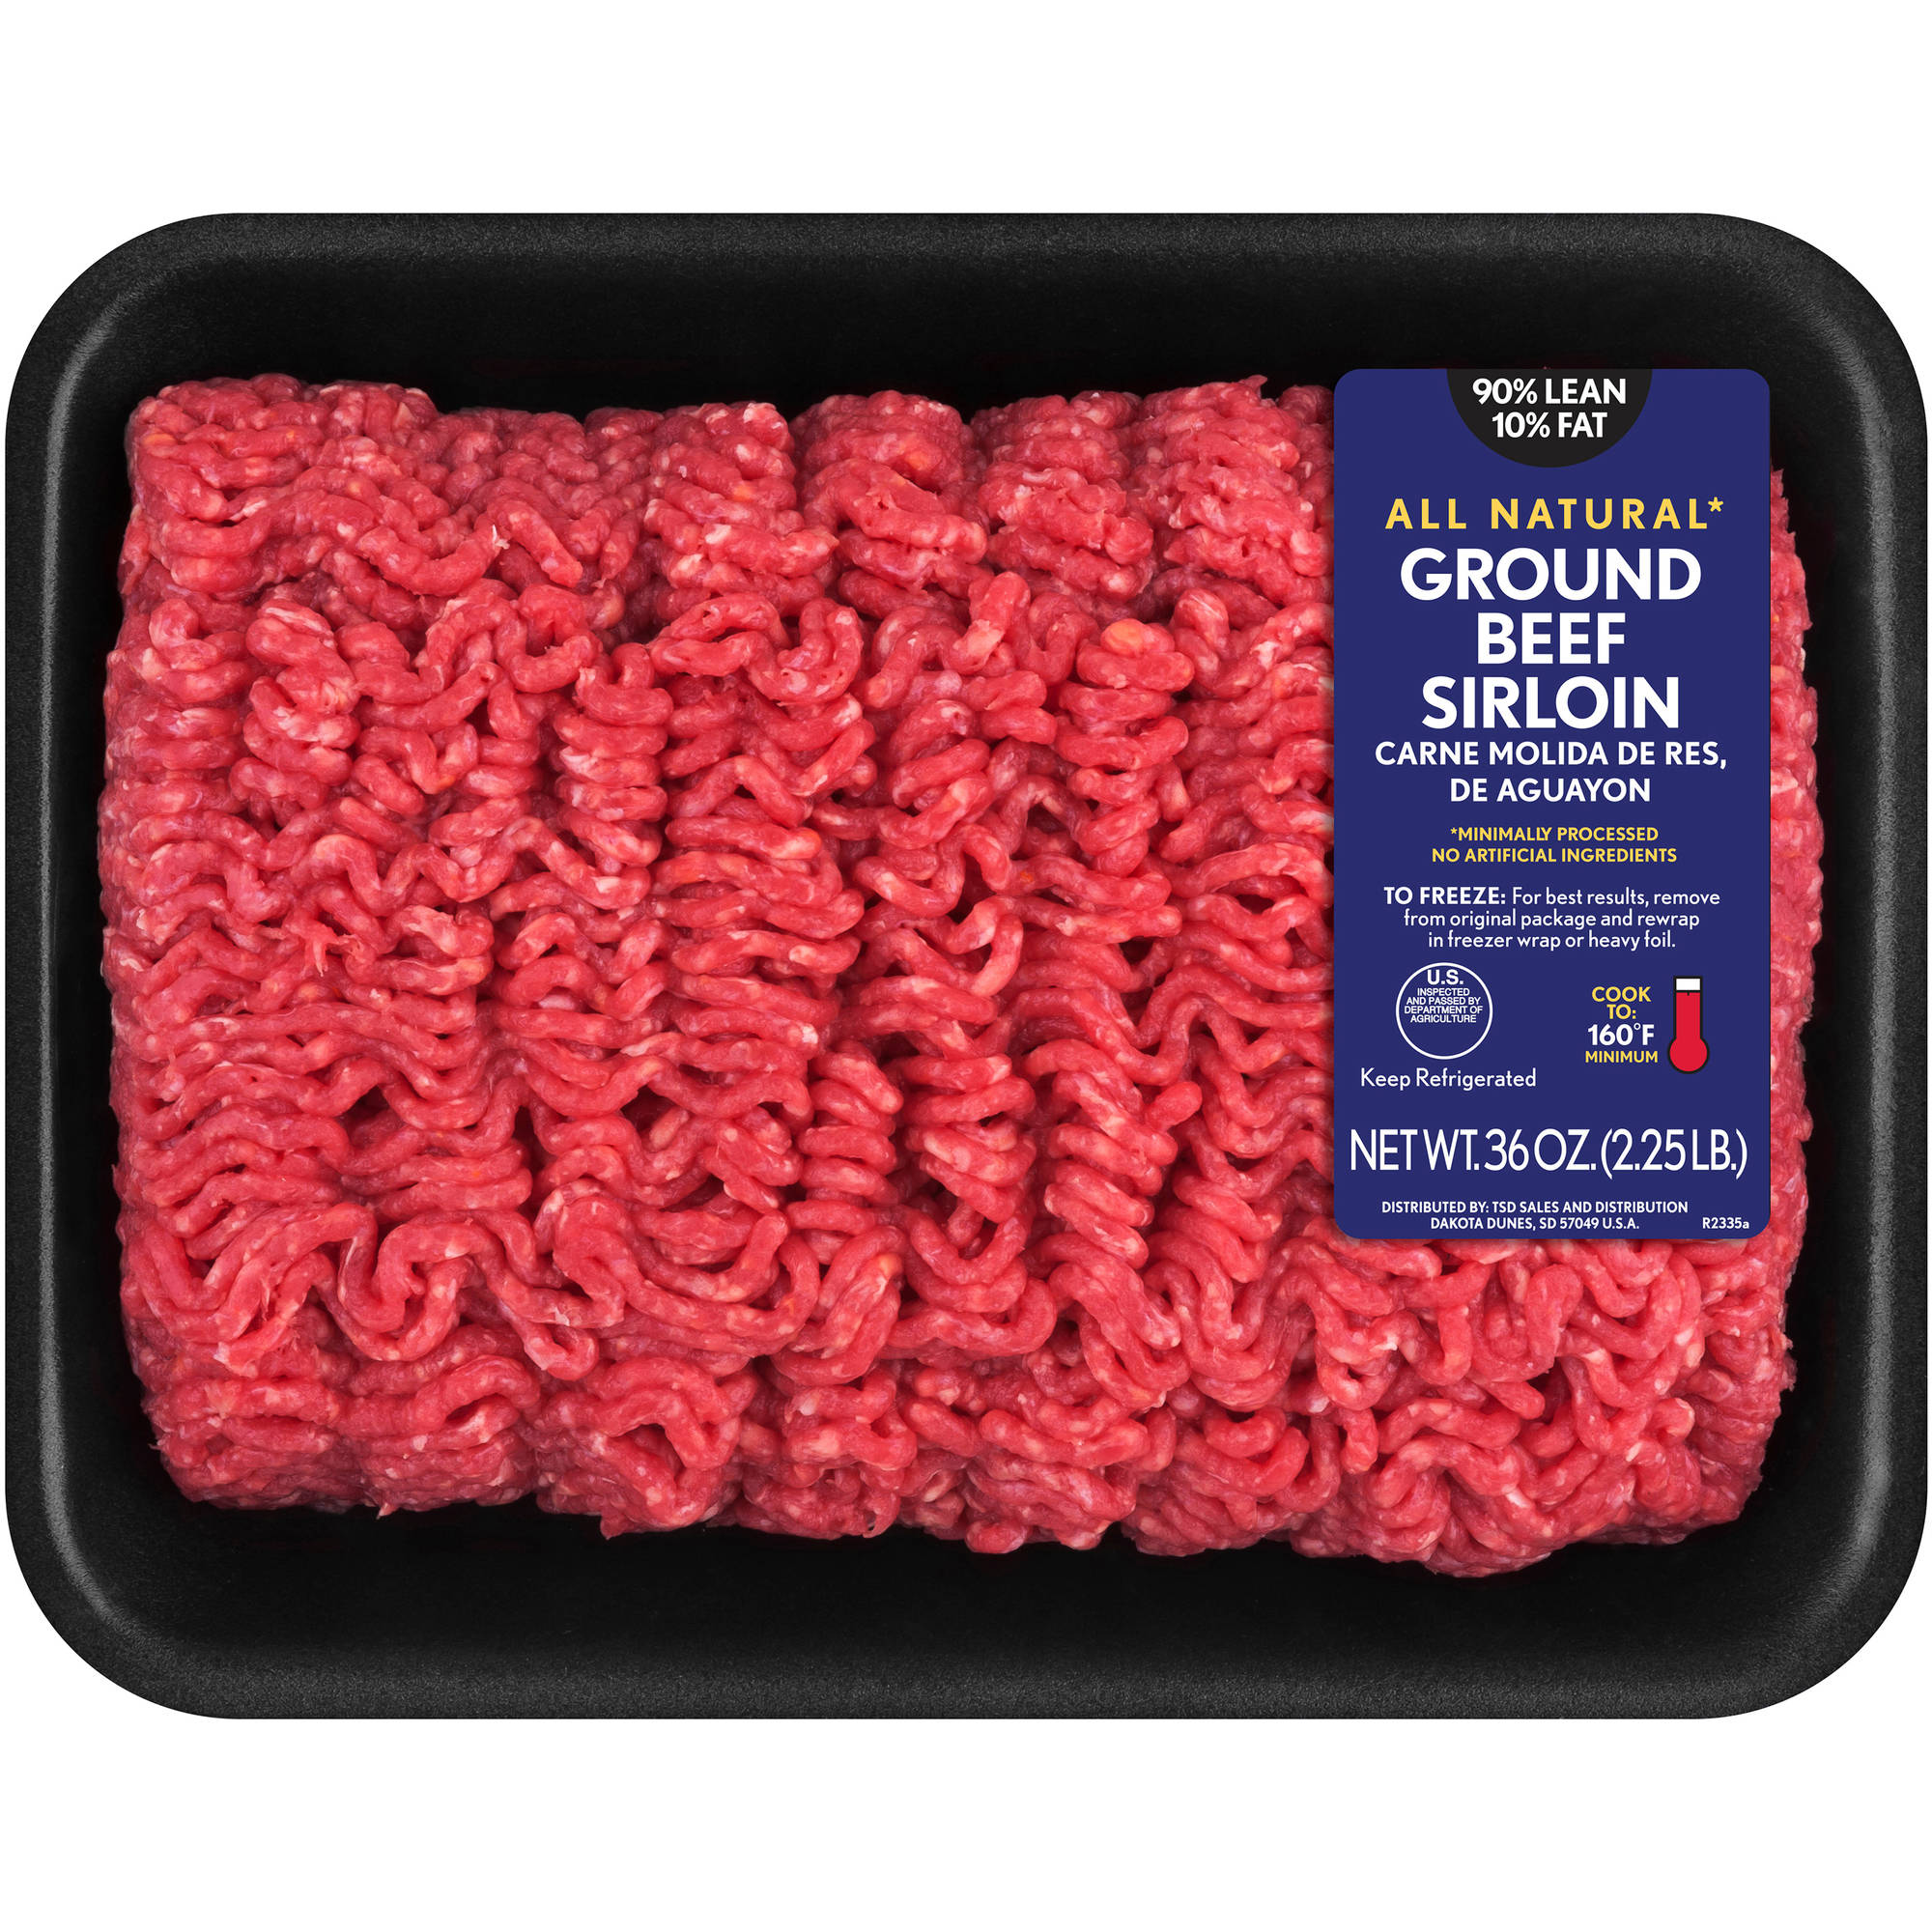 80% Lean/20% Fat, Ground Beef and Pork Tray, 2.25 lbs - Walmart.com